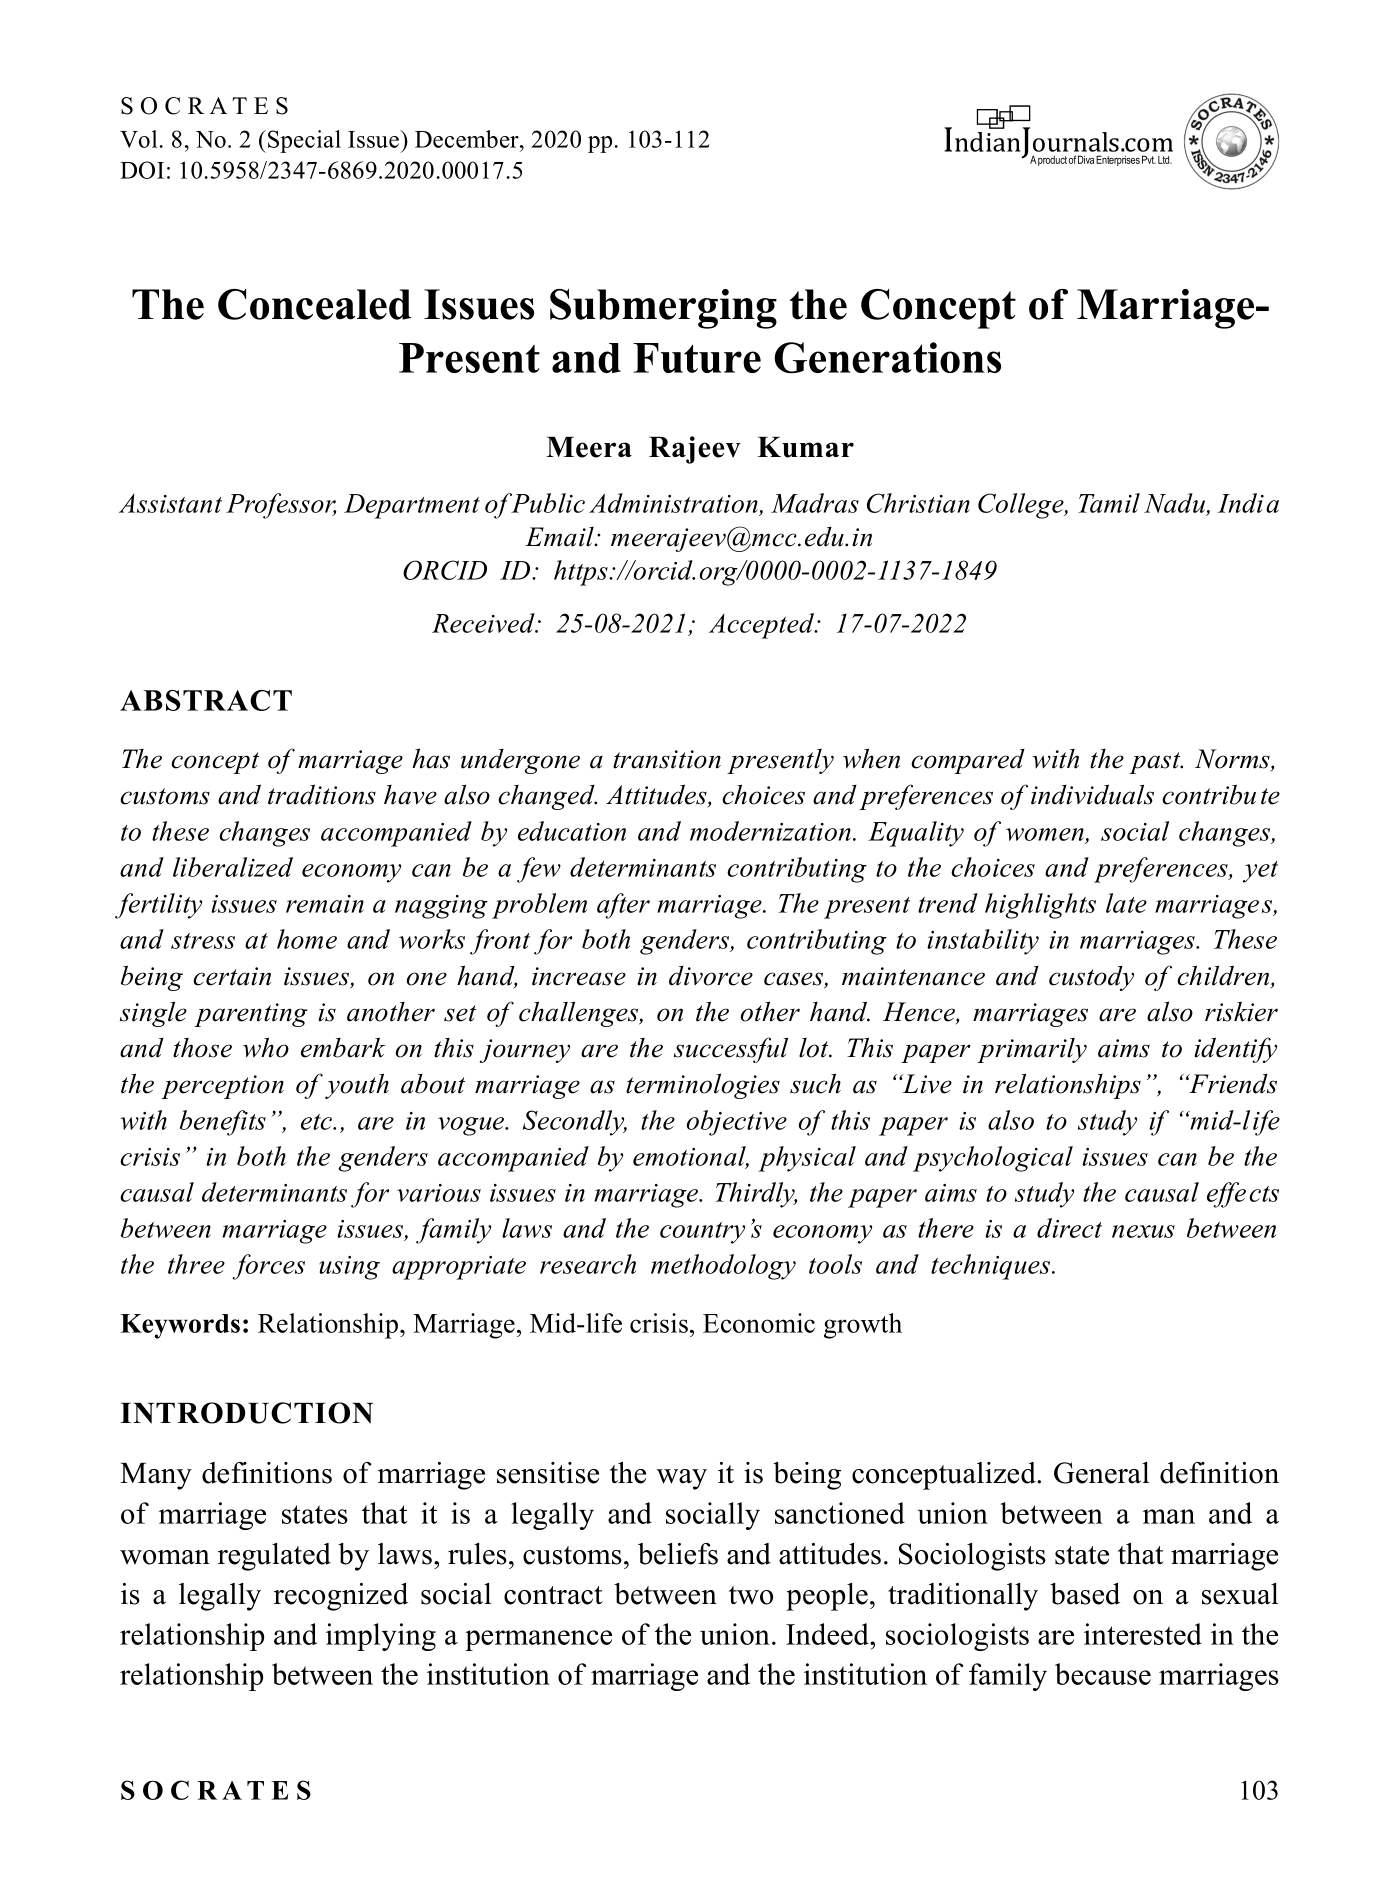  Settings The concealed issues submerging the concept of marriage 